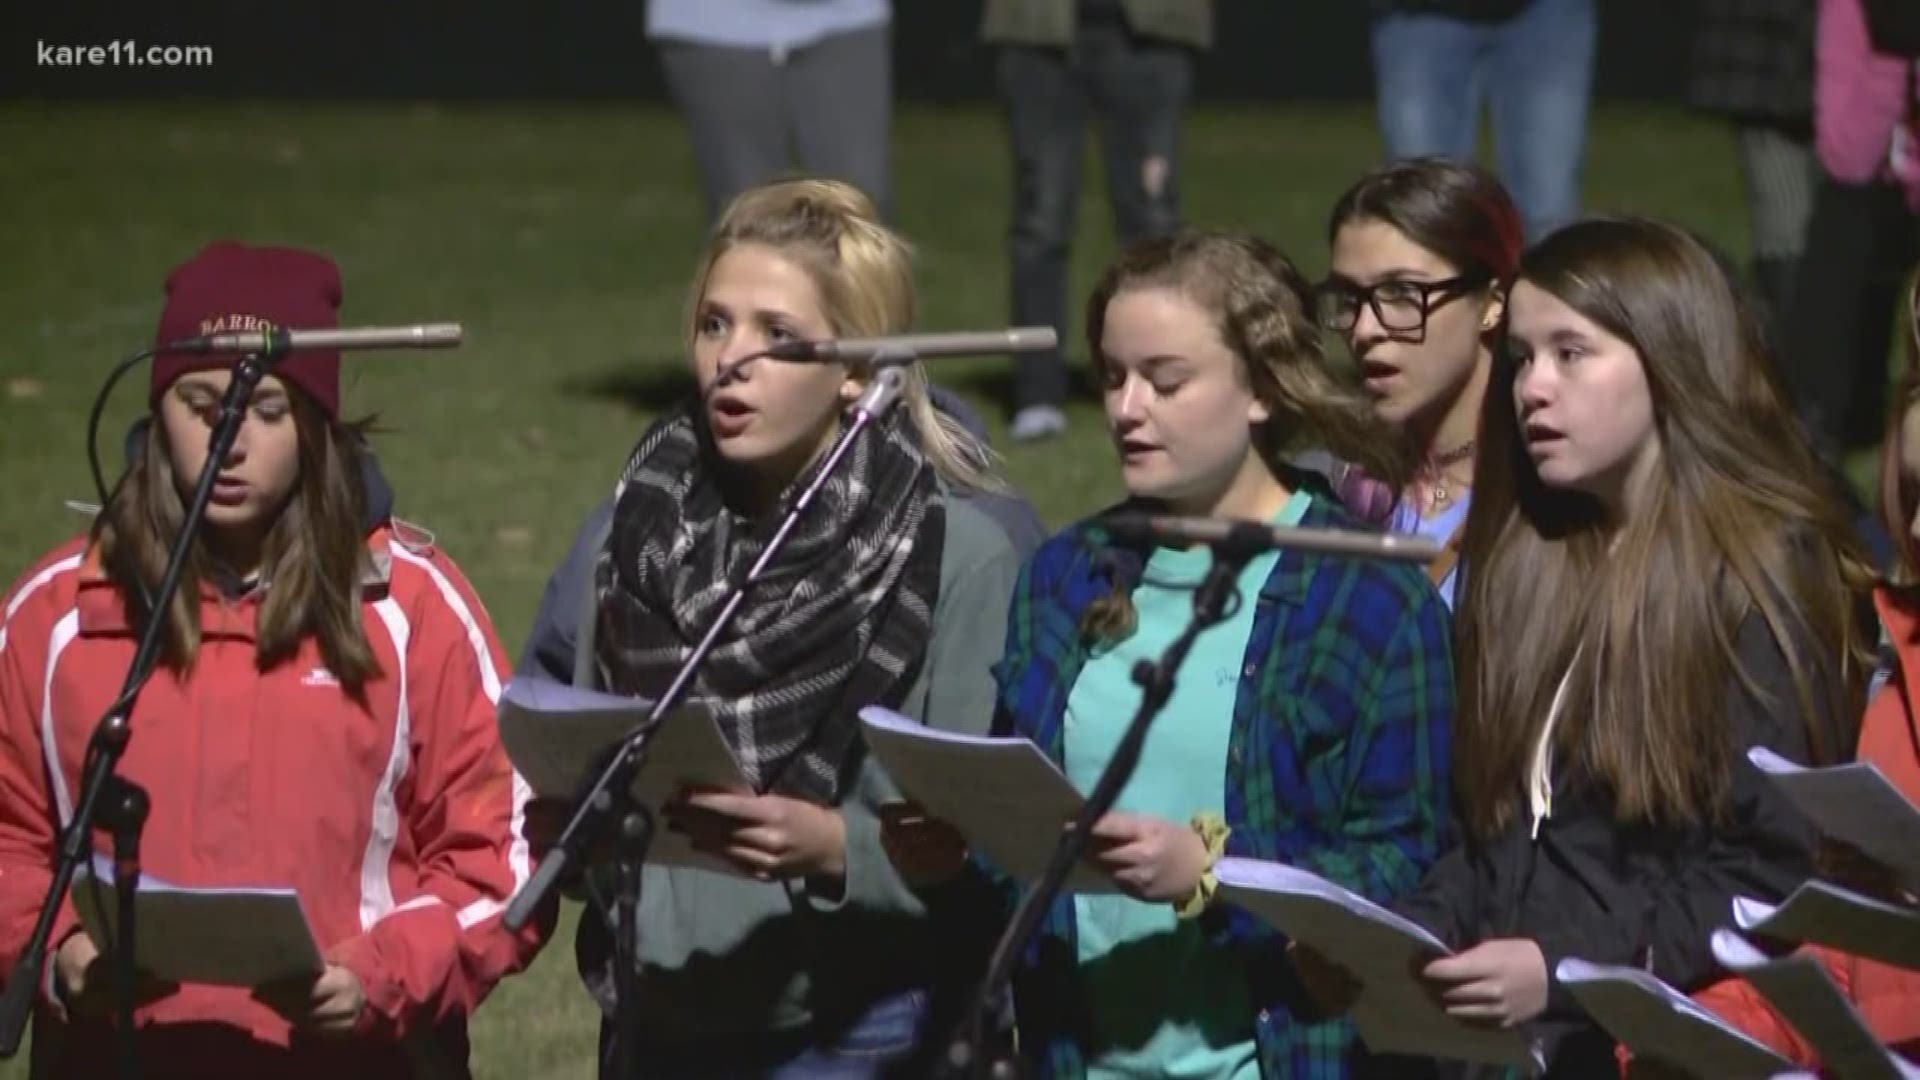 The people of Barron, Wisconsin, have not lost hope that Jayme Closs will return home safely. Jayme's own choir led the community in a song Monday night at the high school football field as they gathered to share their hope that she will return home safel